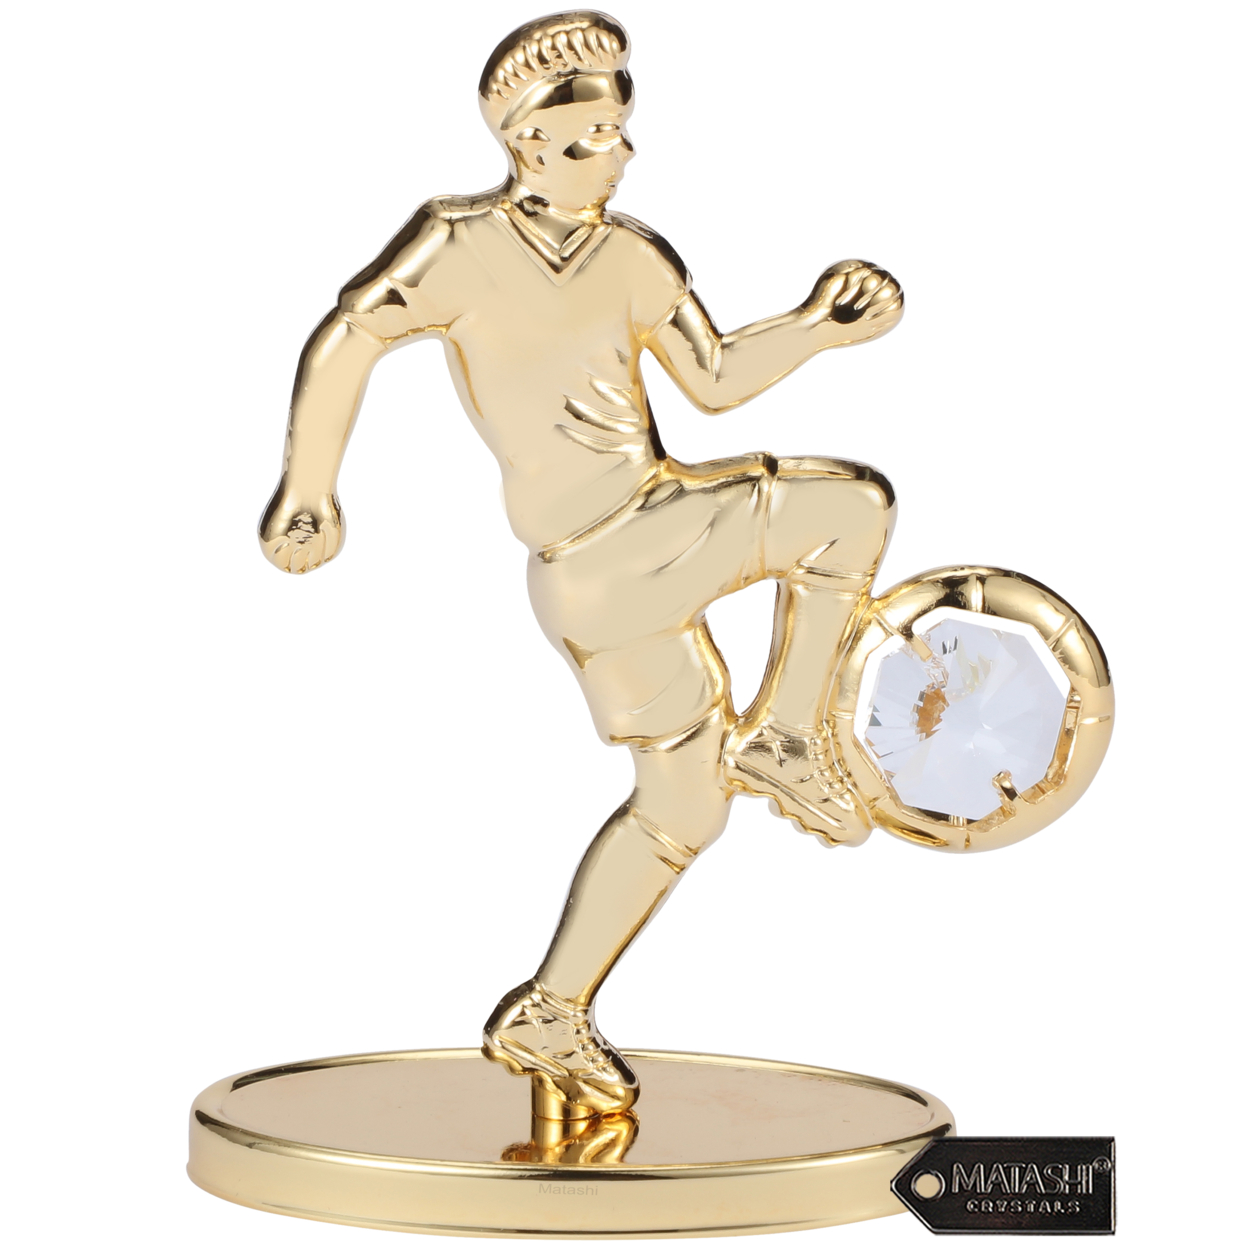 Matashi 24K Gold Plated Soccer Football Player Figurine W/ Crystals Tabletop Football Ornament Gift For Sports Fan Desk Accessories Trophy